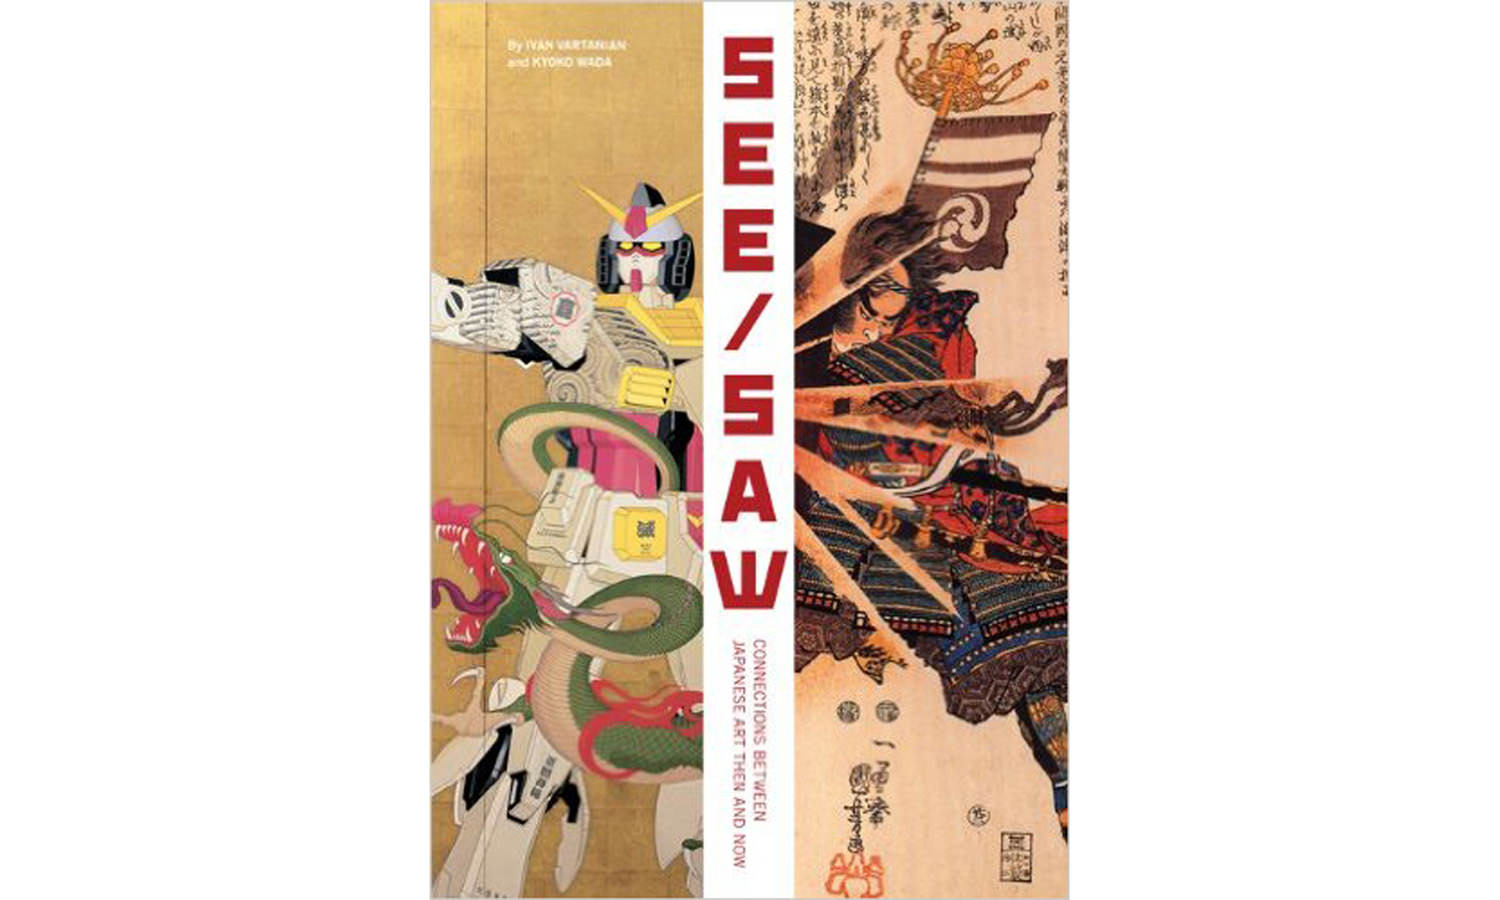 SEE SAW Connections Between Japanese Art Then and Now